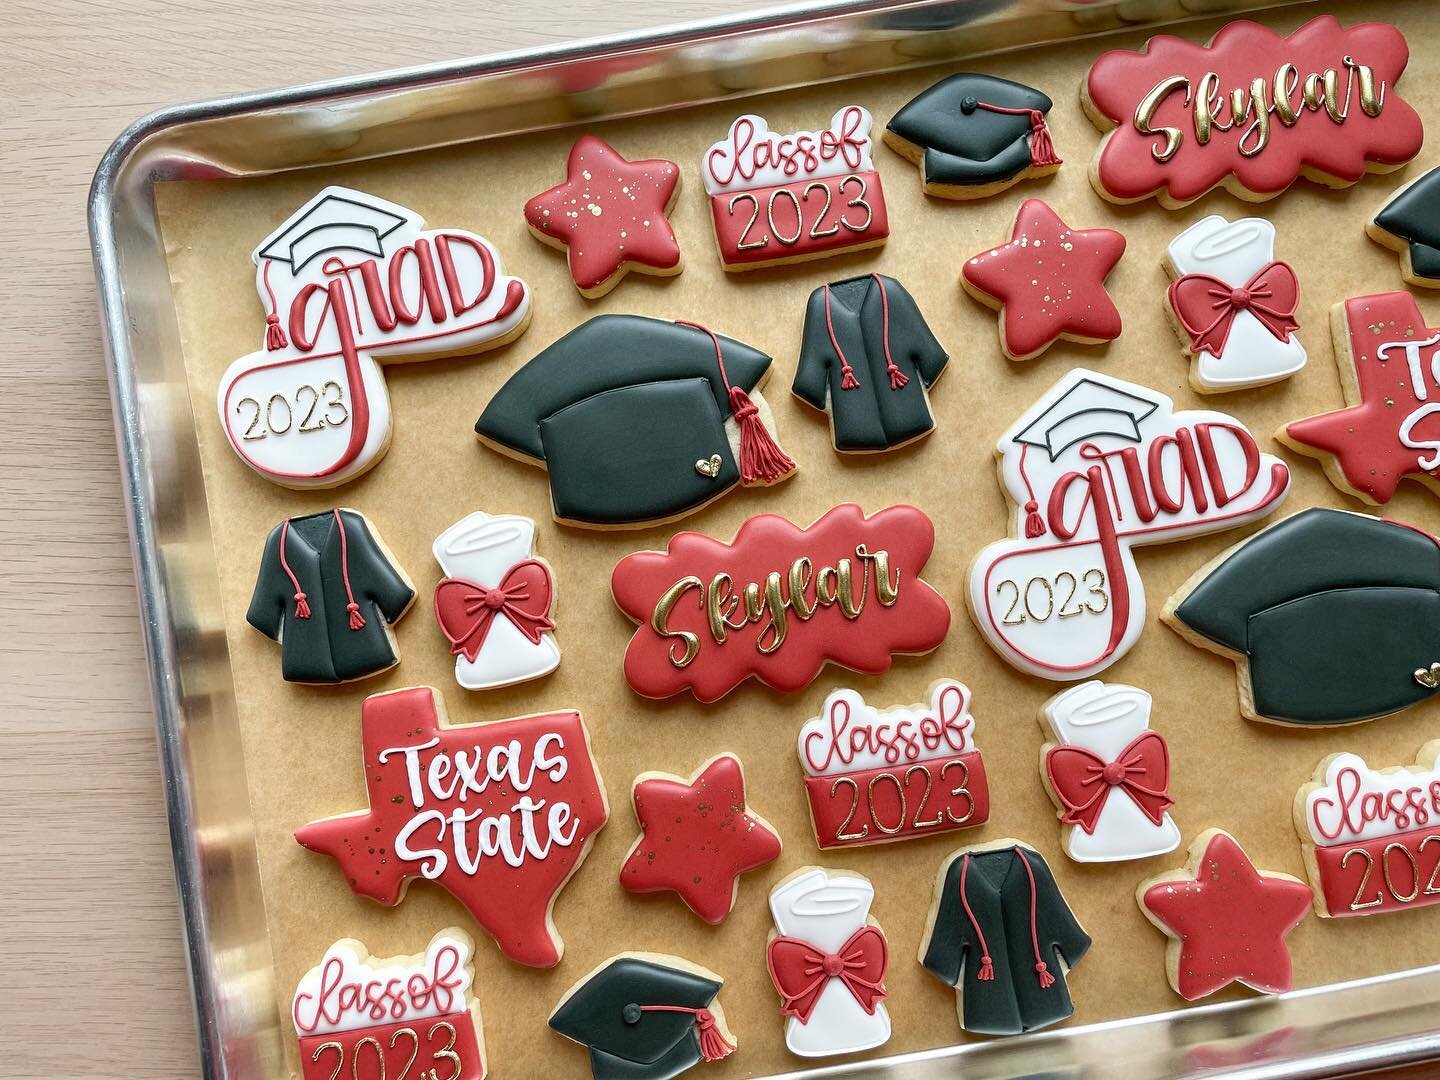 Full on graduation mode over here with lots of grad cookies and cakes going out! I love celebrating academic achievements!! 🎓

#cookies #gradcookies #graduation #graduationcookies #texasstatecookies #txstatecookies #decoratedcookies #cookiedecoratin